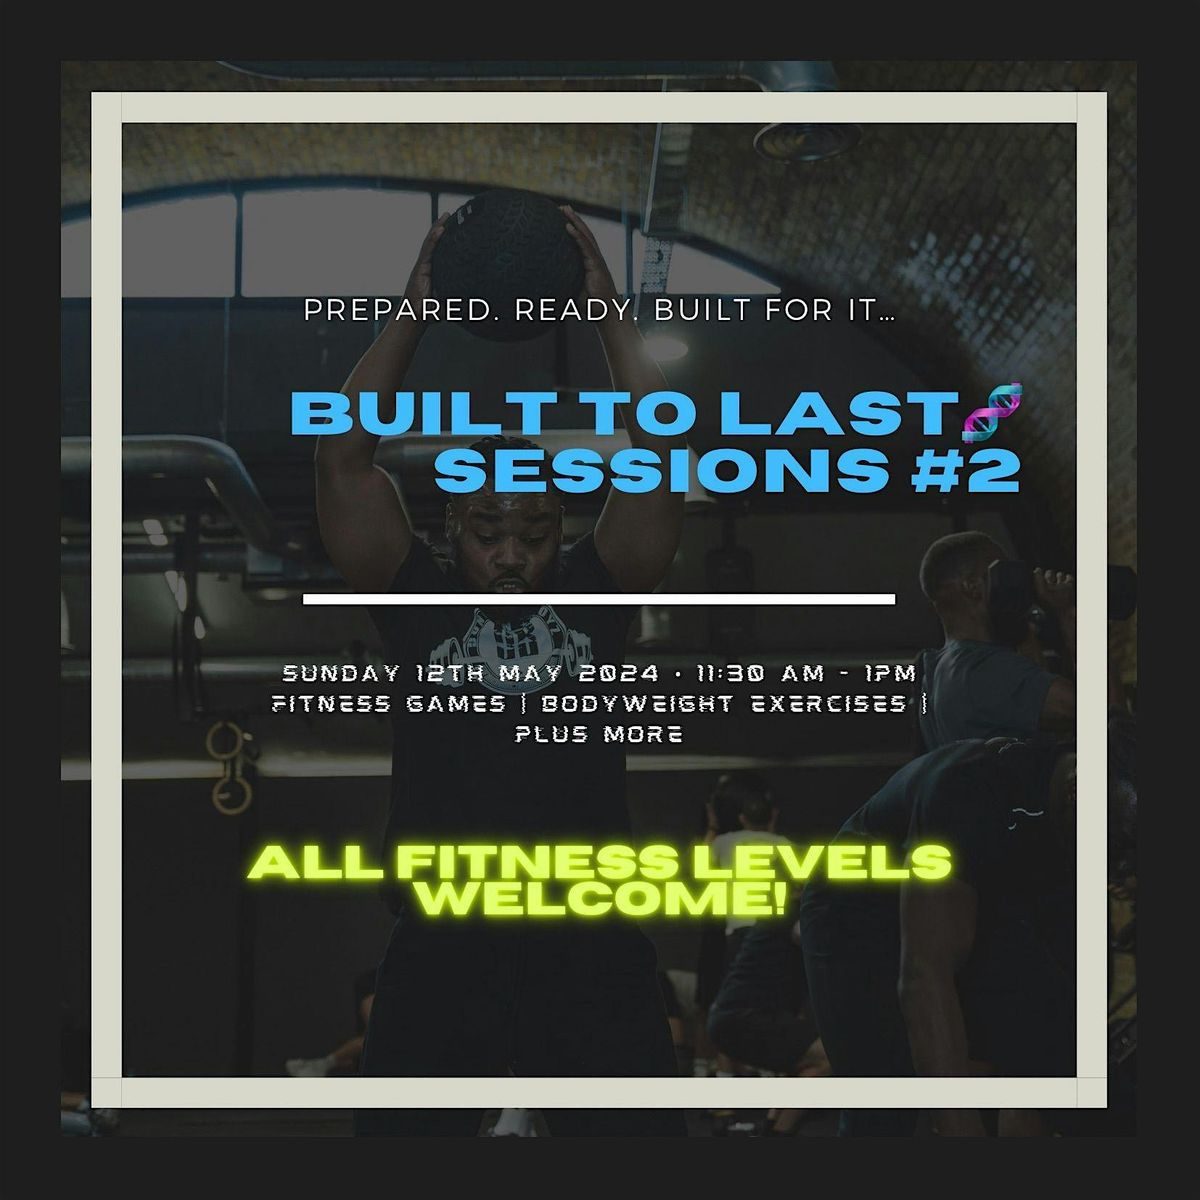 Built to Last Sessions #2